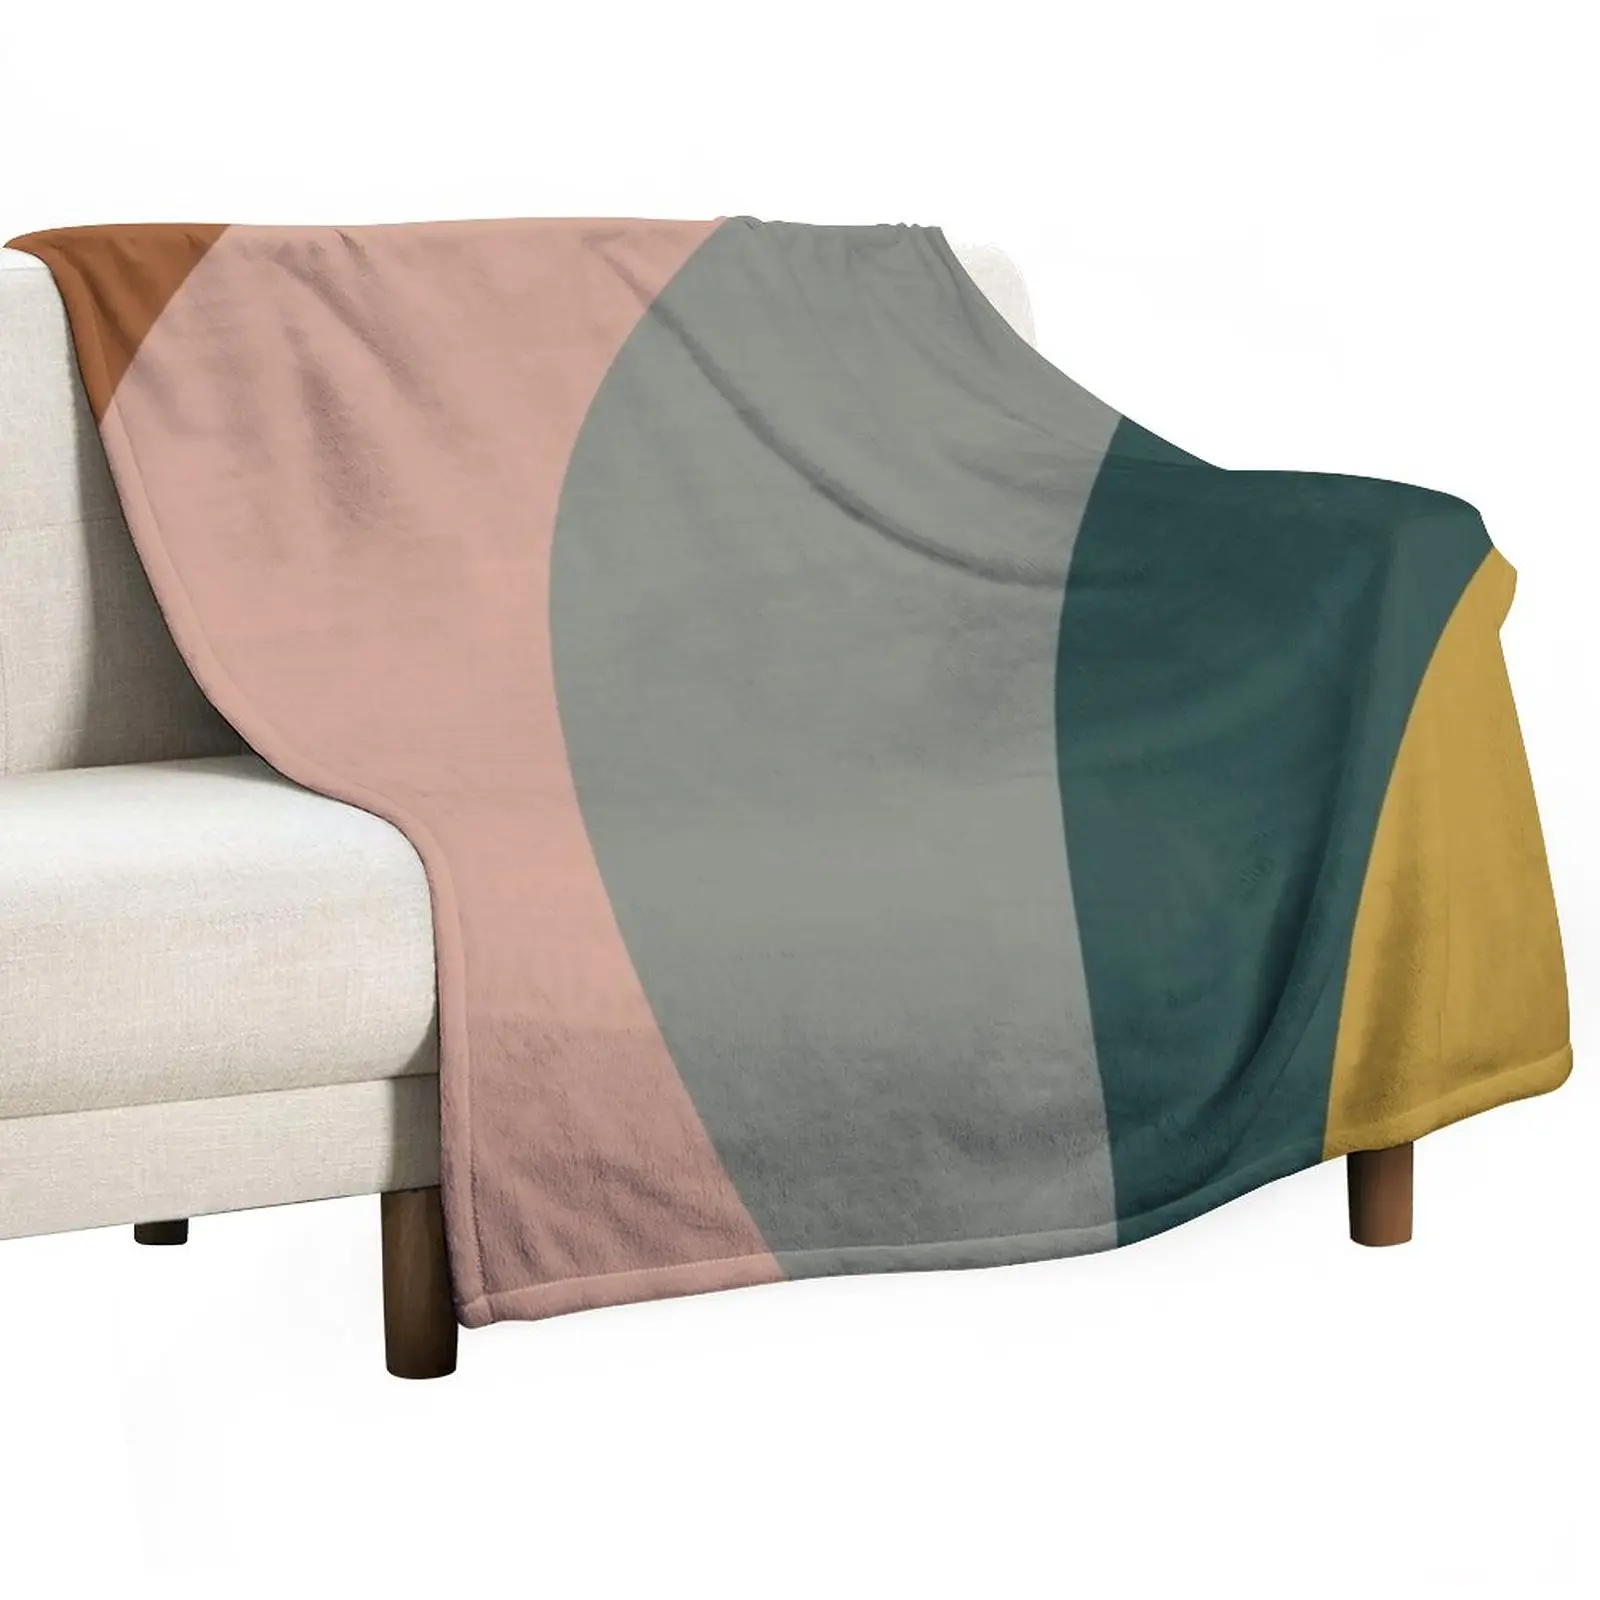 

Sound Waves Minimalist Pattern in Mustard Yellow, Teal, Grey, Blush Pink, and Rust Throw Blanket anime Sofa Blankets